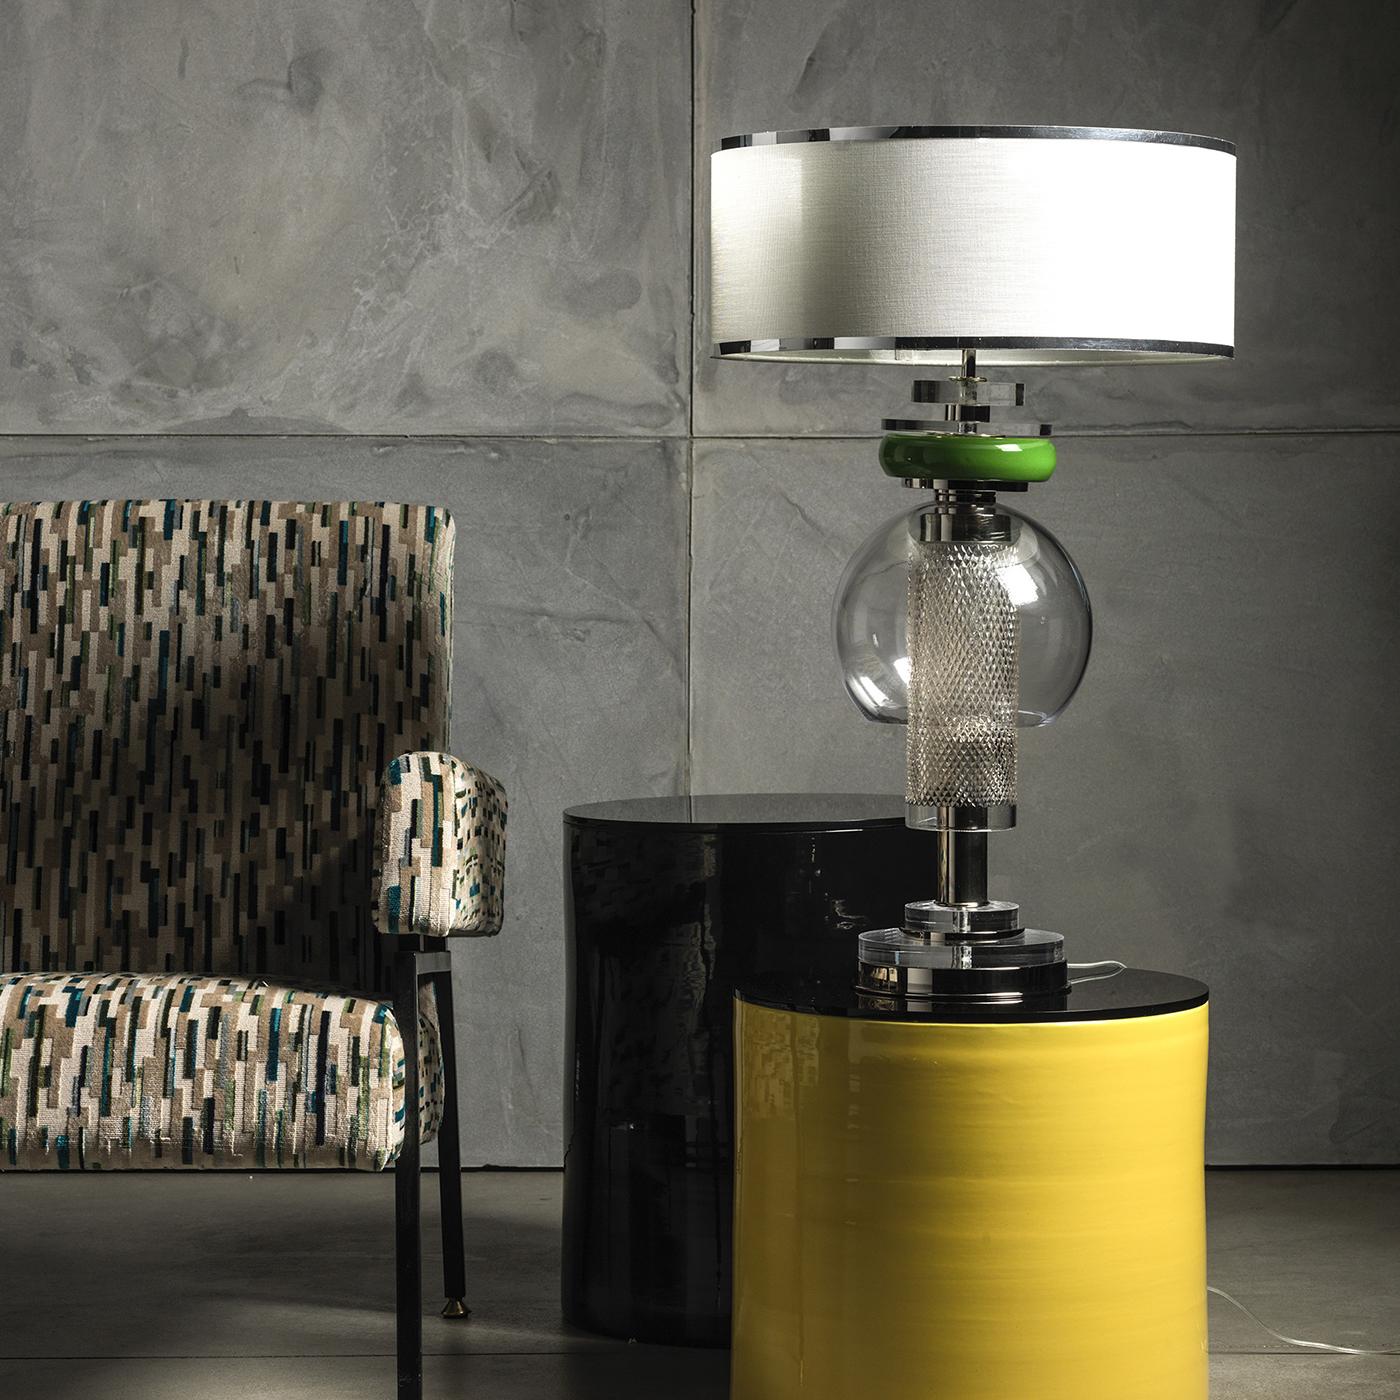 This crystal table lamp is composed of green Majolica pottery, nickel-plated brass and plexiglass. Its double lampshade features a silver woven-fabric exterior with an interior in green silk. Its sophisticated minimalism displays a surprising visual